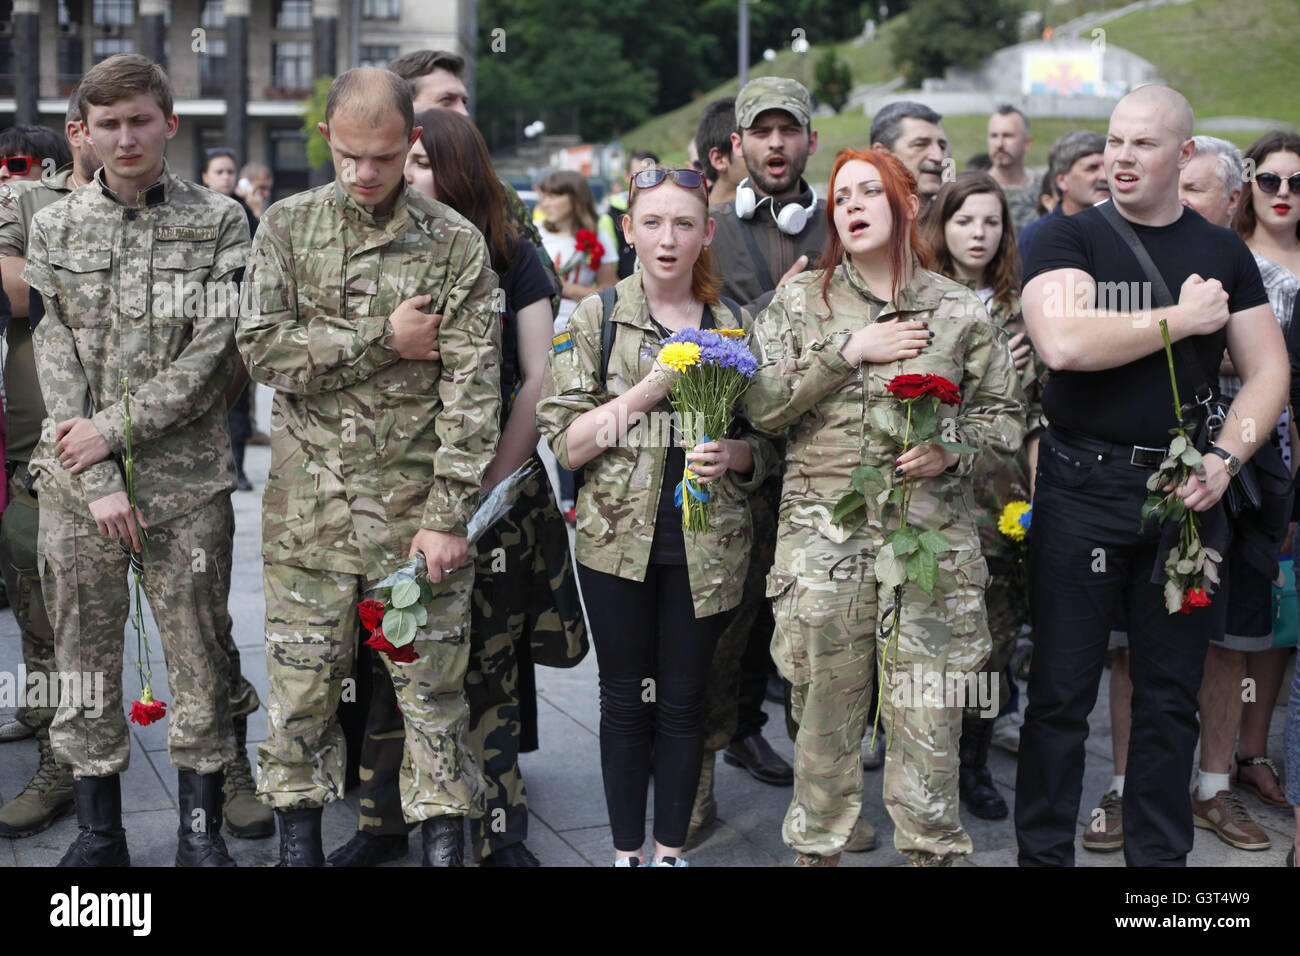 Kiev, Ukraine. 14th June, 2016. Relatives, friends and comrades attend a funeral ceremony for the 'Right Sector' political party fighters Yuri Gnatyuk and Robert Masley, who reportedly were killed in the eastern Ukraine conflict, at the Independence Square in Kiev, Ukraine, 14 June 2016. Pro-Russian rebels attacked Ukrainian army positions in eastern Ukraine 40 times in the past 24 hours, according to the Ukrainian government's official press center for the so-called Anti-Terrorist Operation Credit:  Nazar Furyk/ZUMA Wire/Alamy Live News Stock Photo